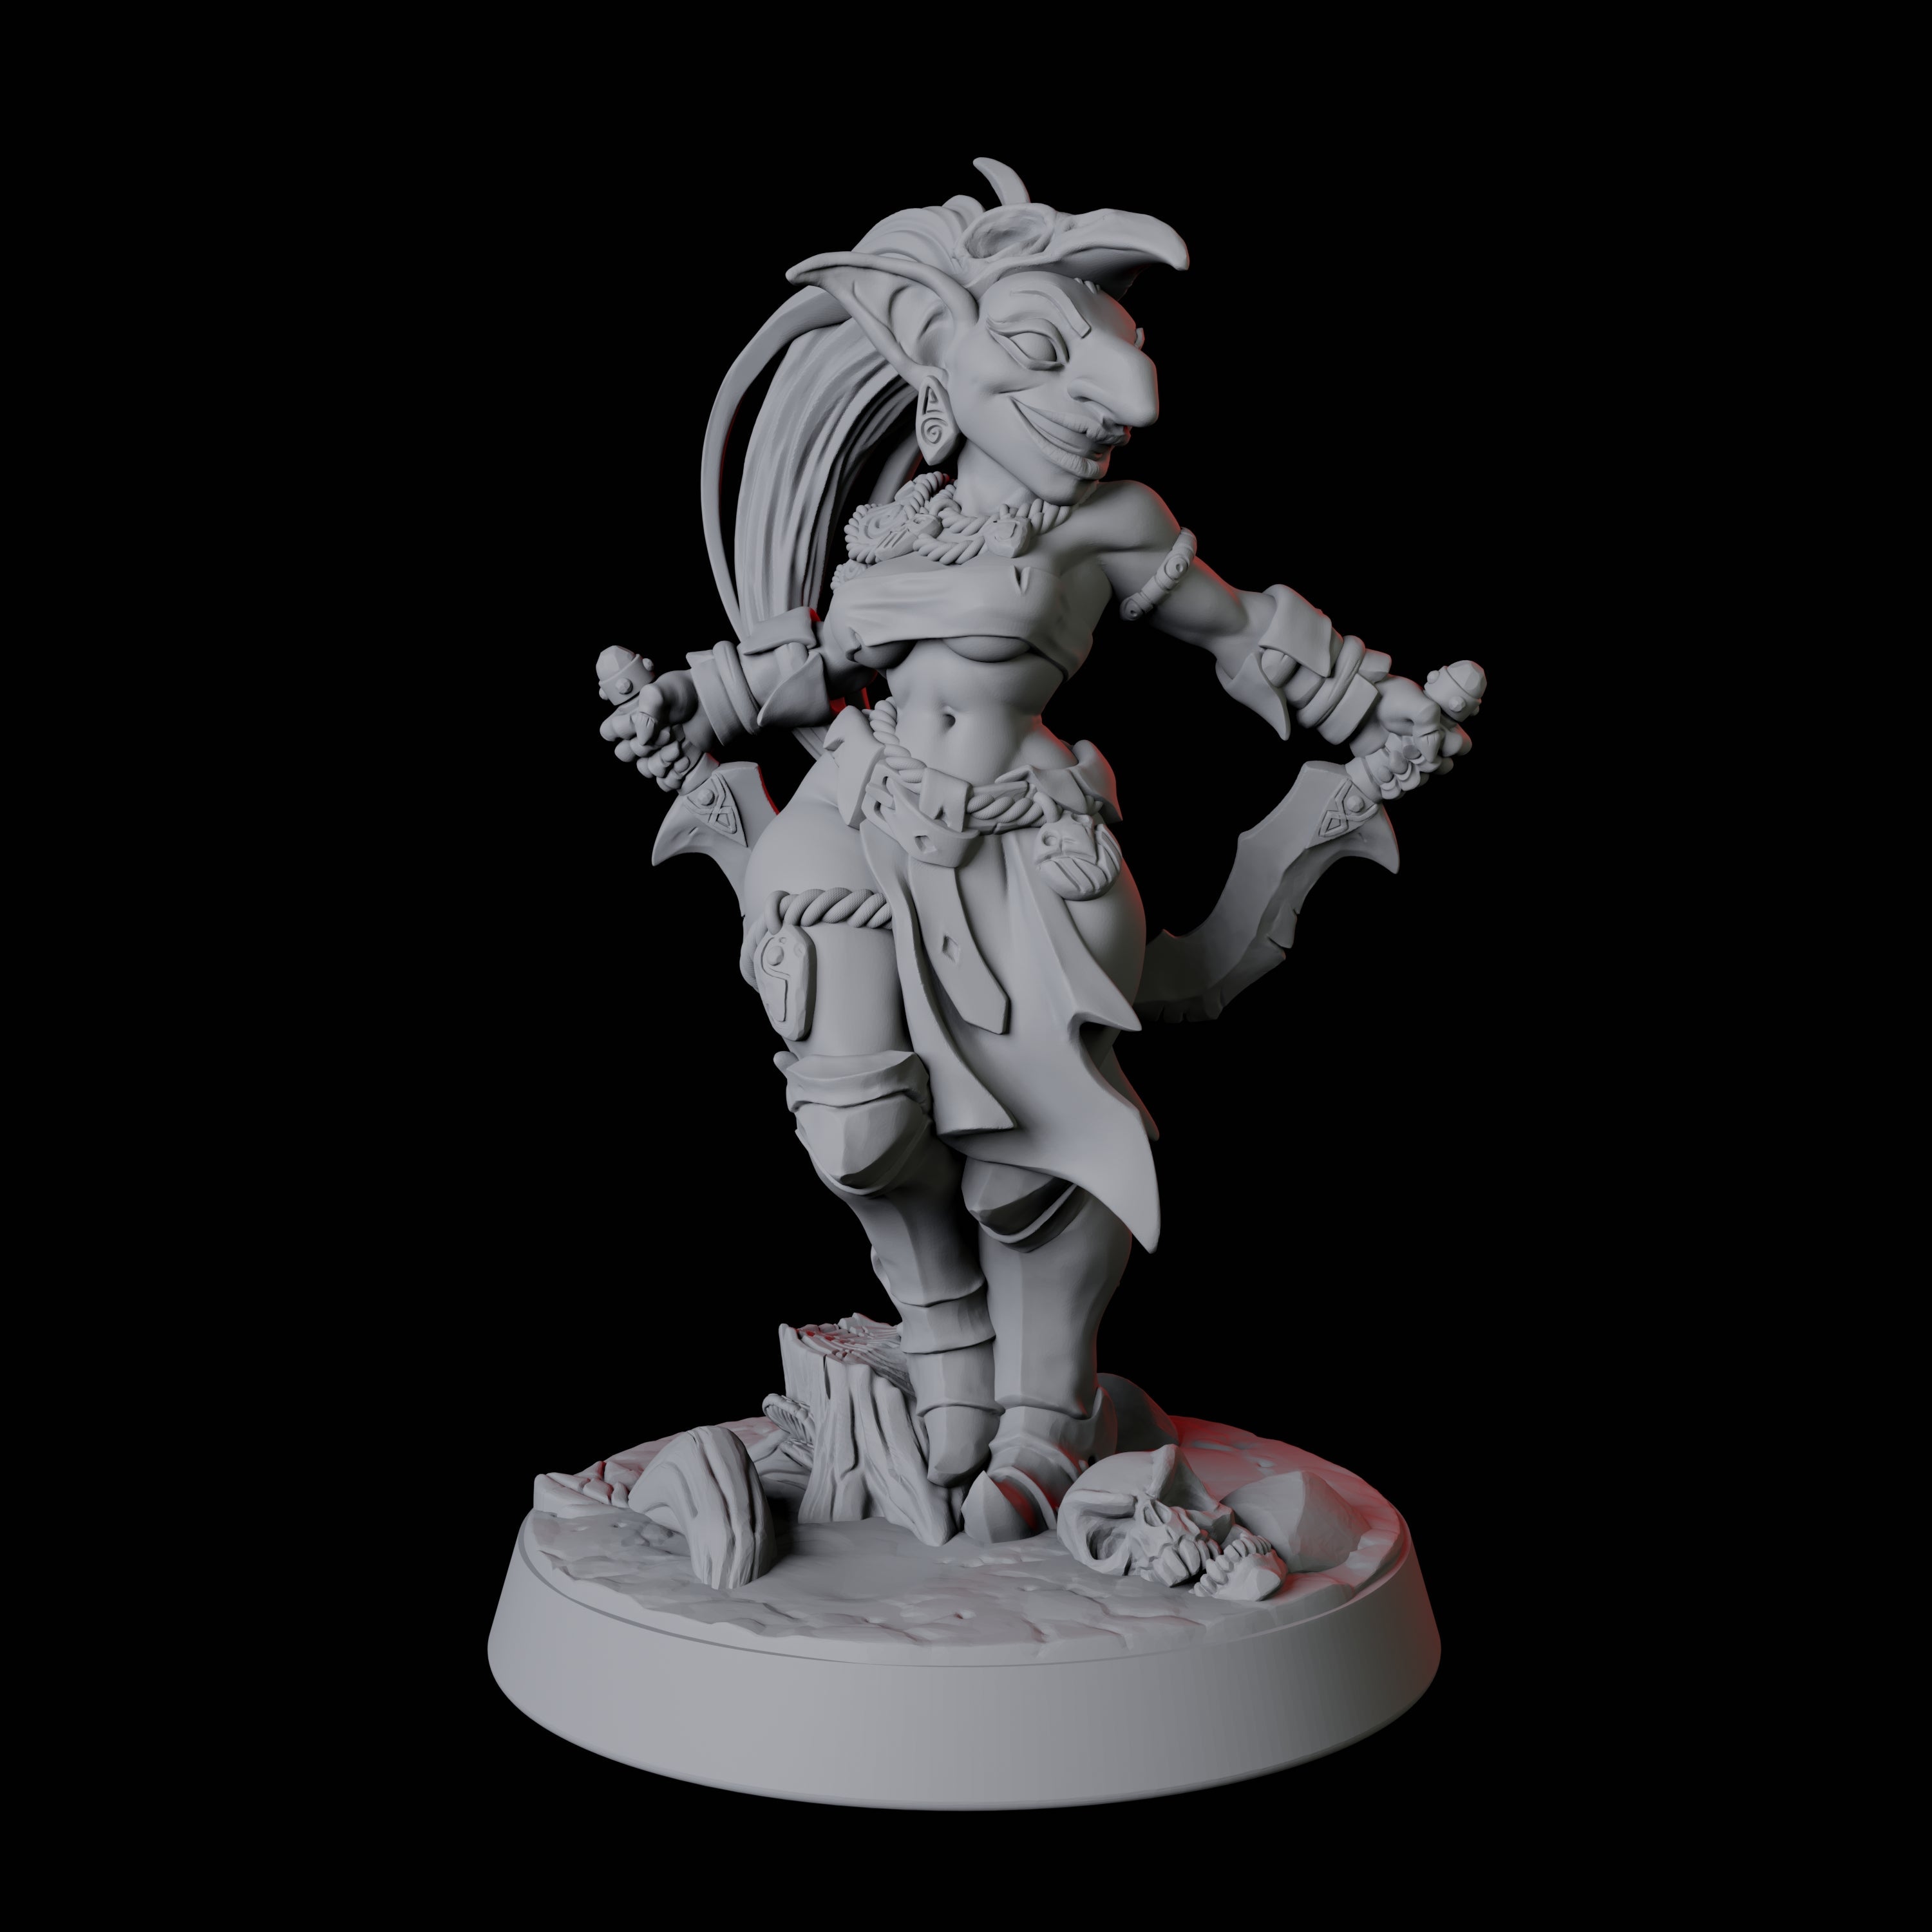 Dancing Goblin Pinup Miniature for Dungeons and Dragons, Pathfinder or other TTRPGs